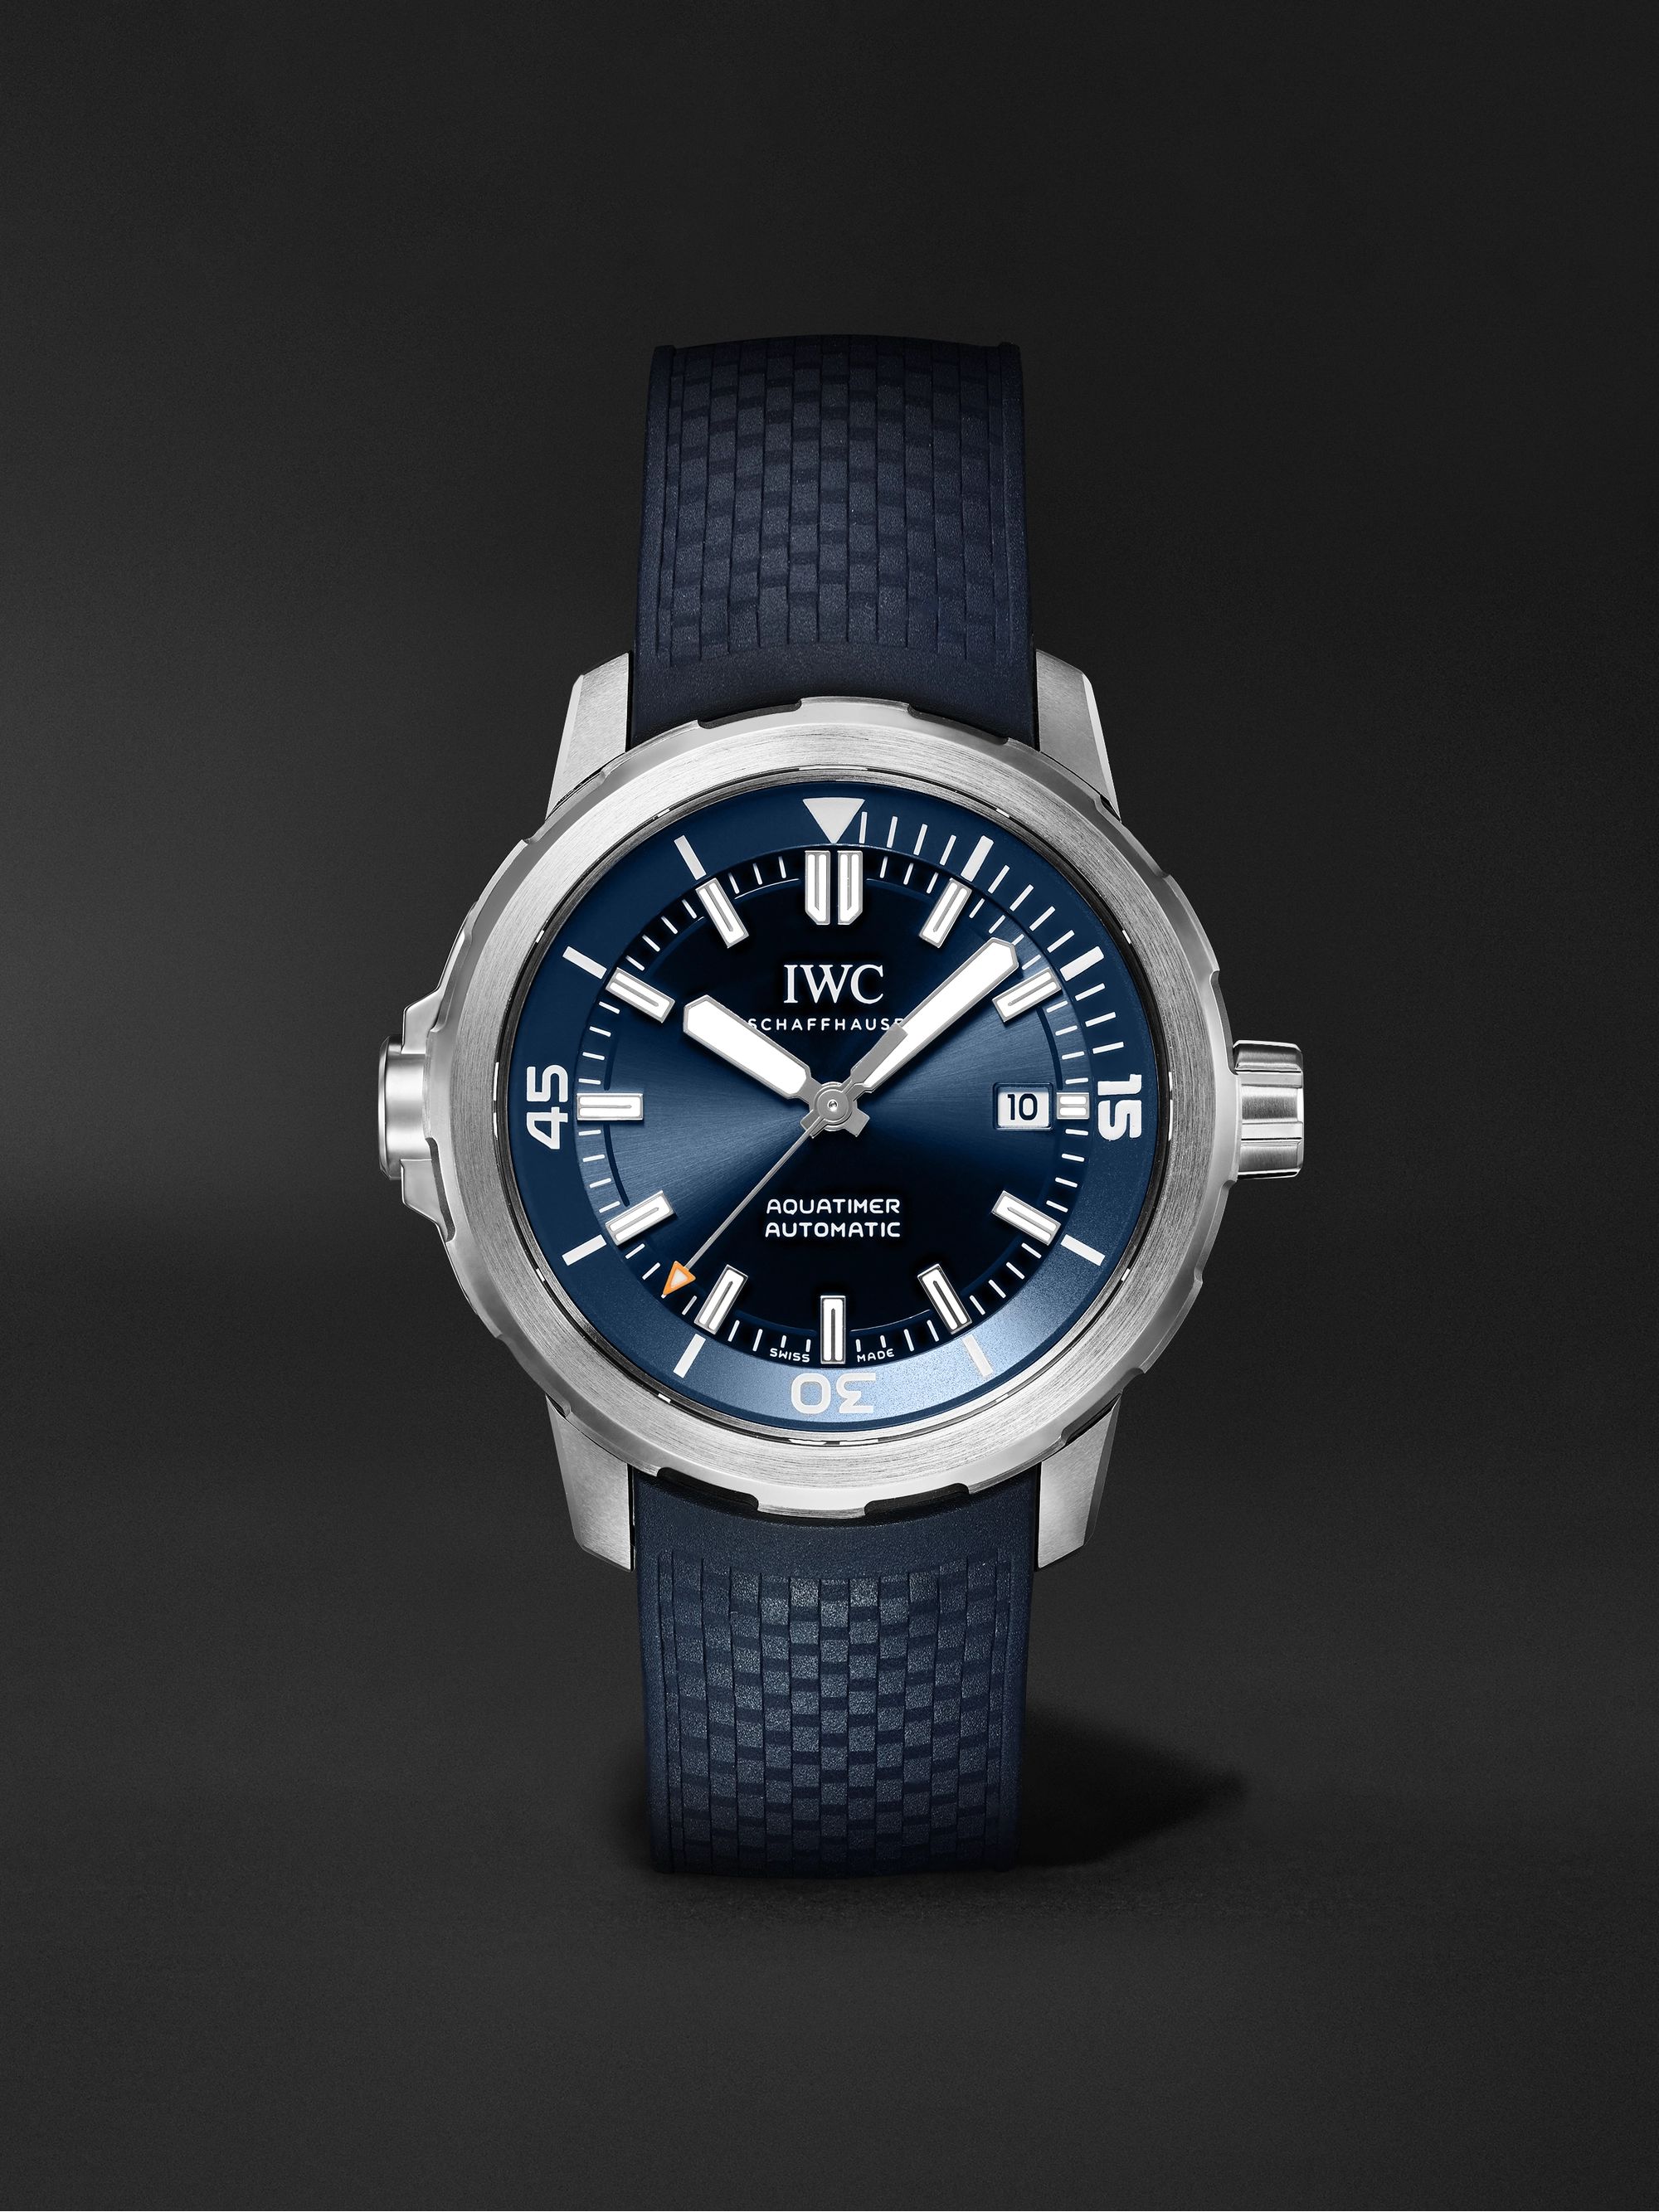 IWC SCHAFFHAUSEN Aquatimer Expedition Jacques-Yves Cousteau Automatic 42mm Stainless Steel and Rubber Watch, Ref. No. IW328801